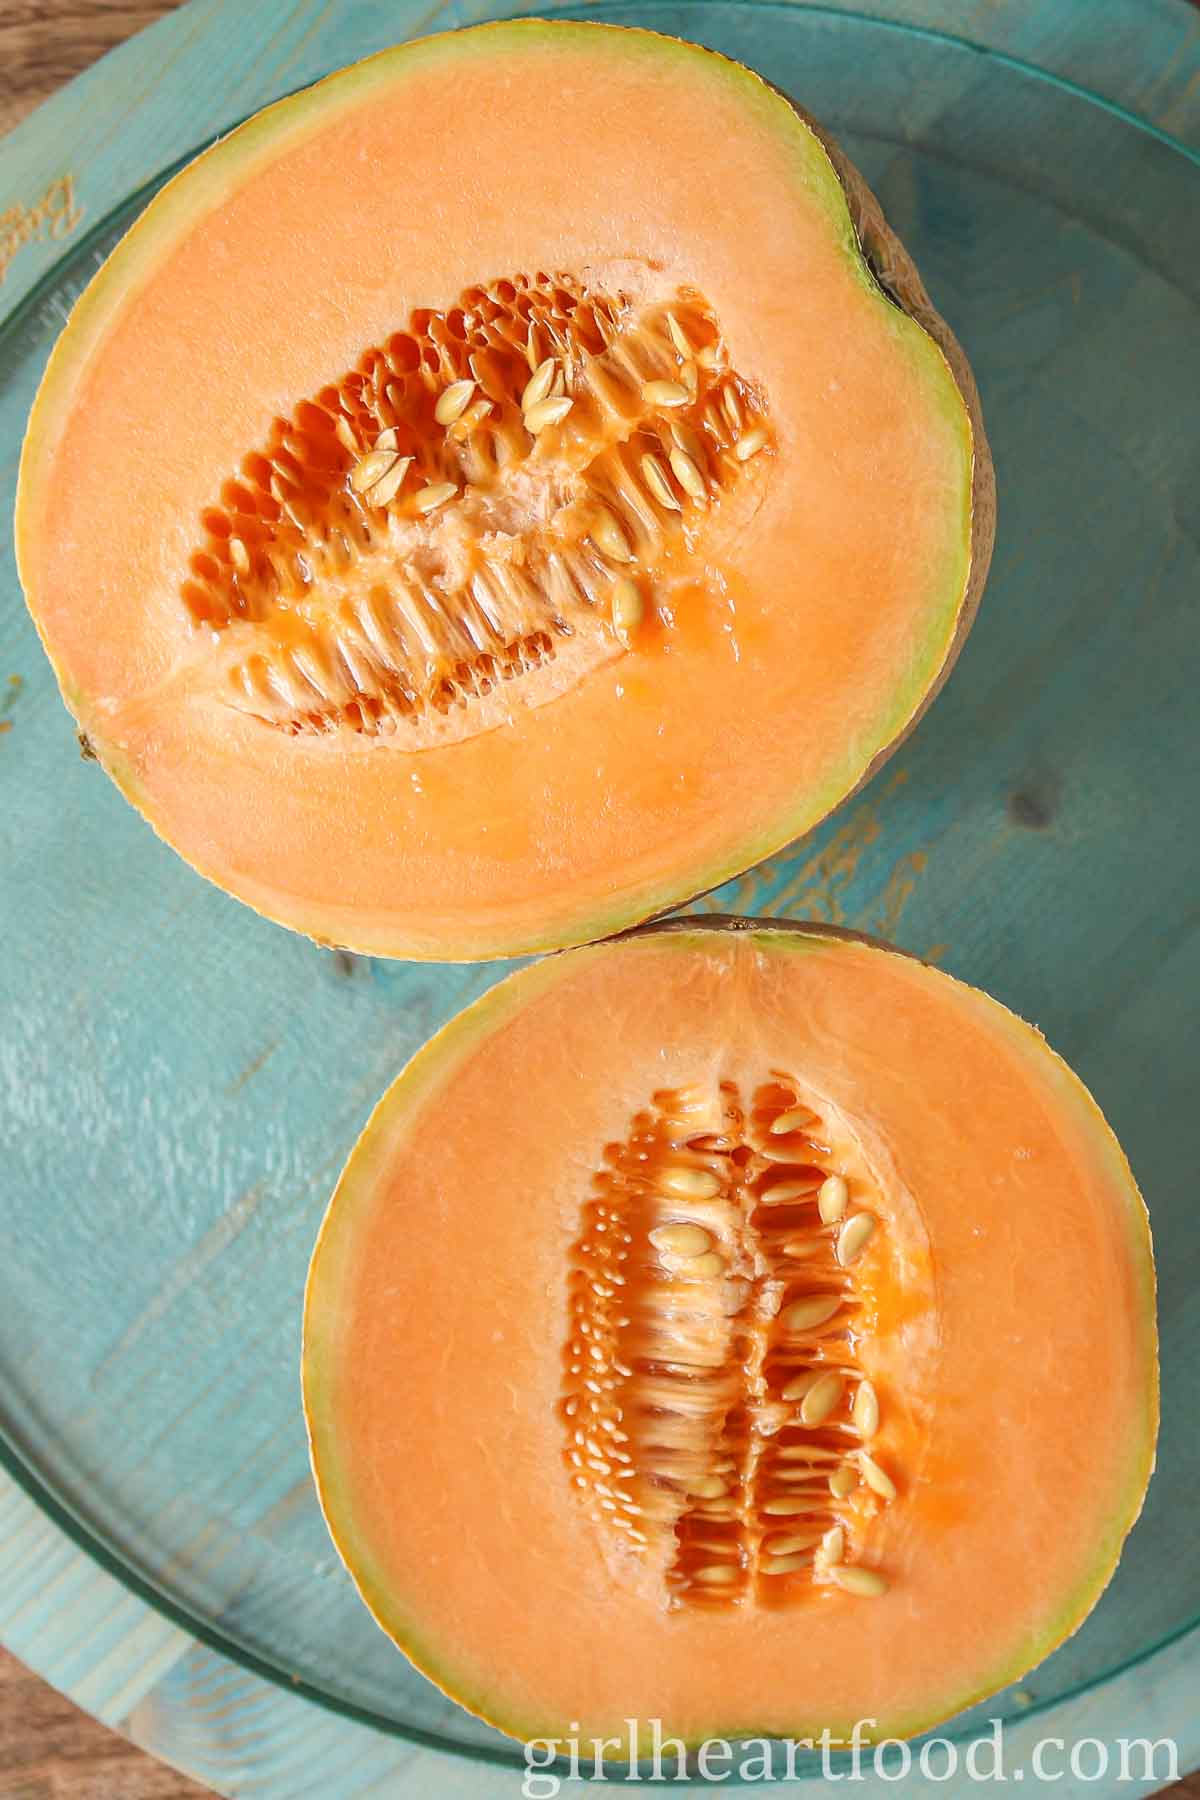 Two halves of a cut cantaloupe on a blue board.